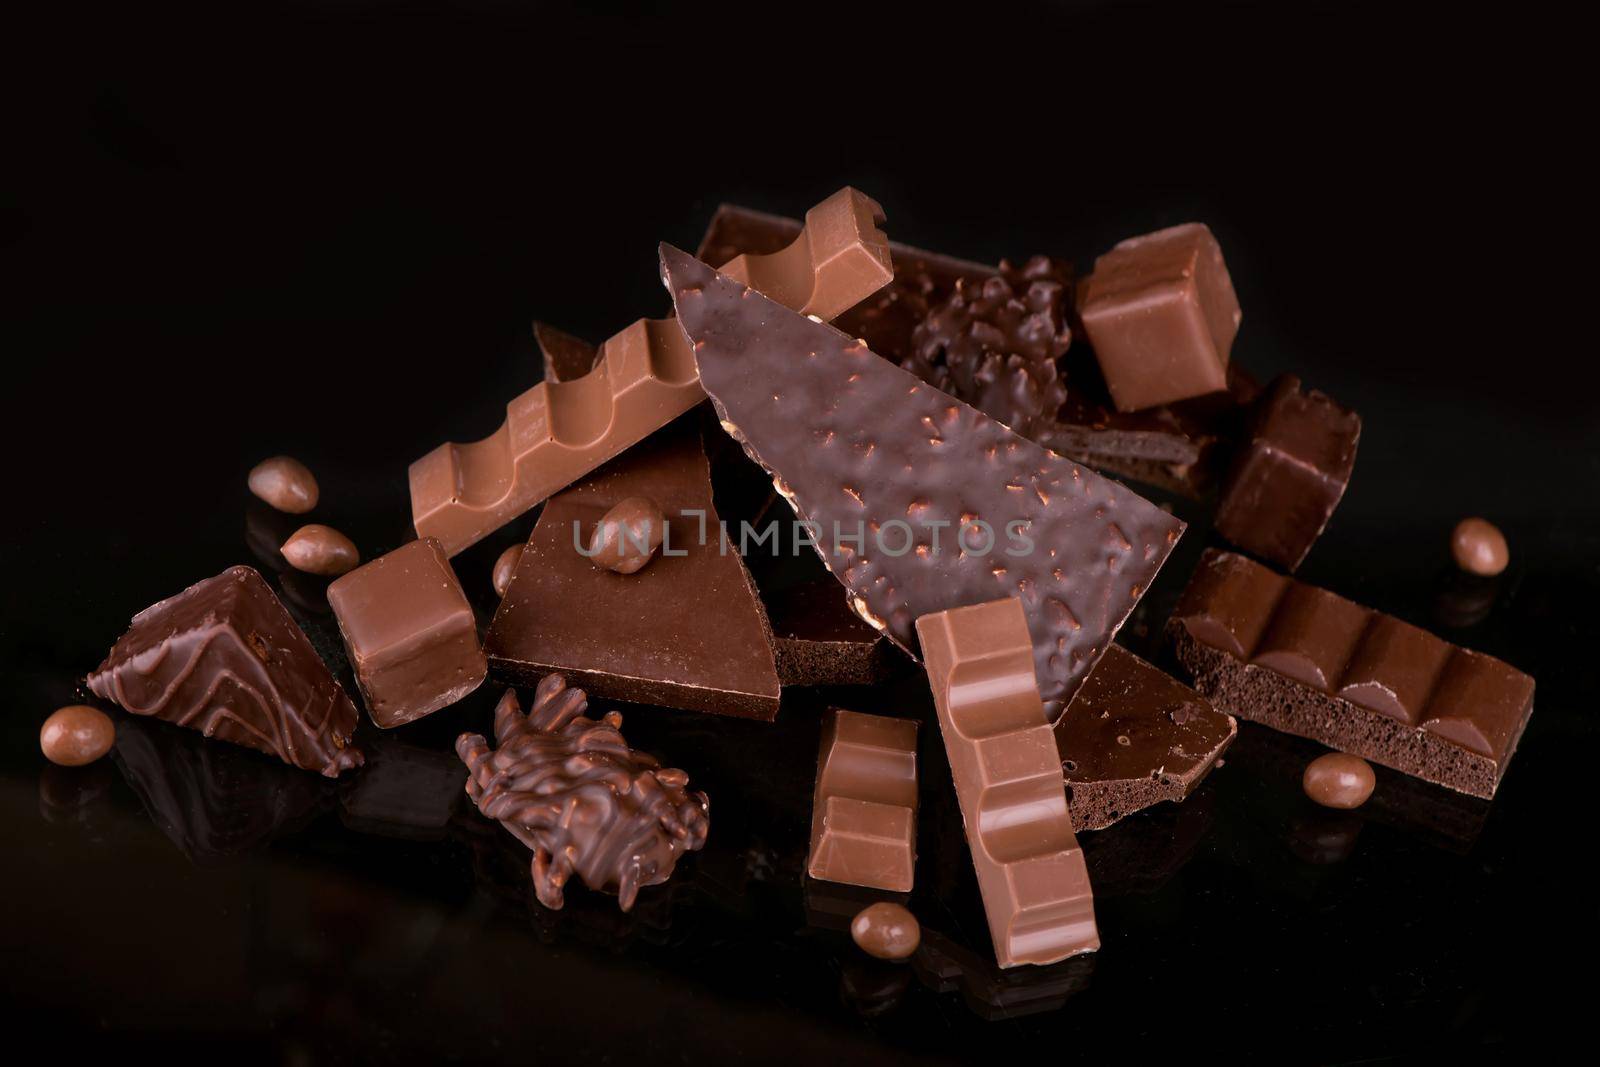 Broken chocolate pieces and cocoa powder on wooden background. by aprilphoto